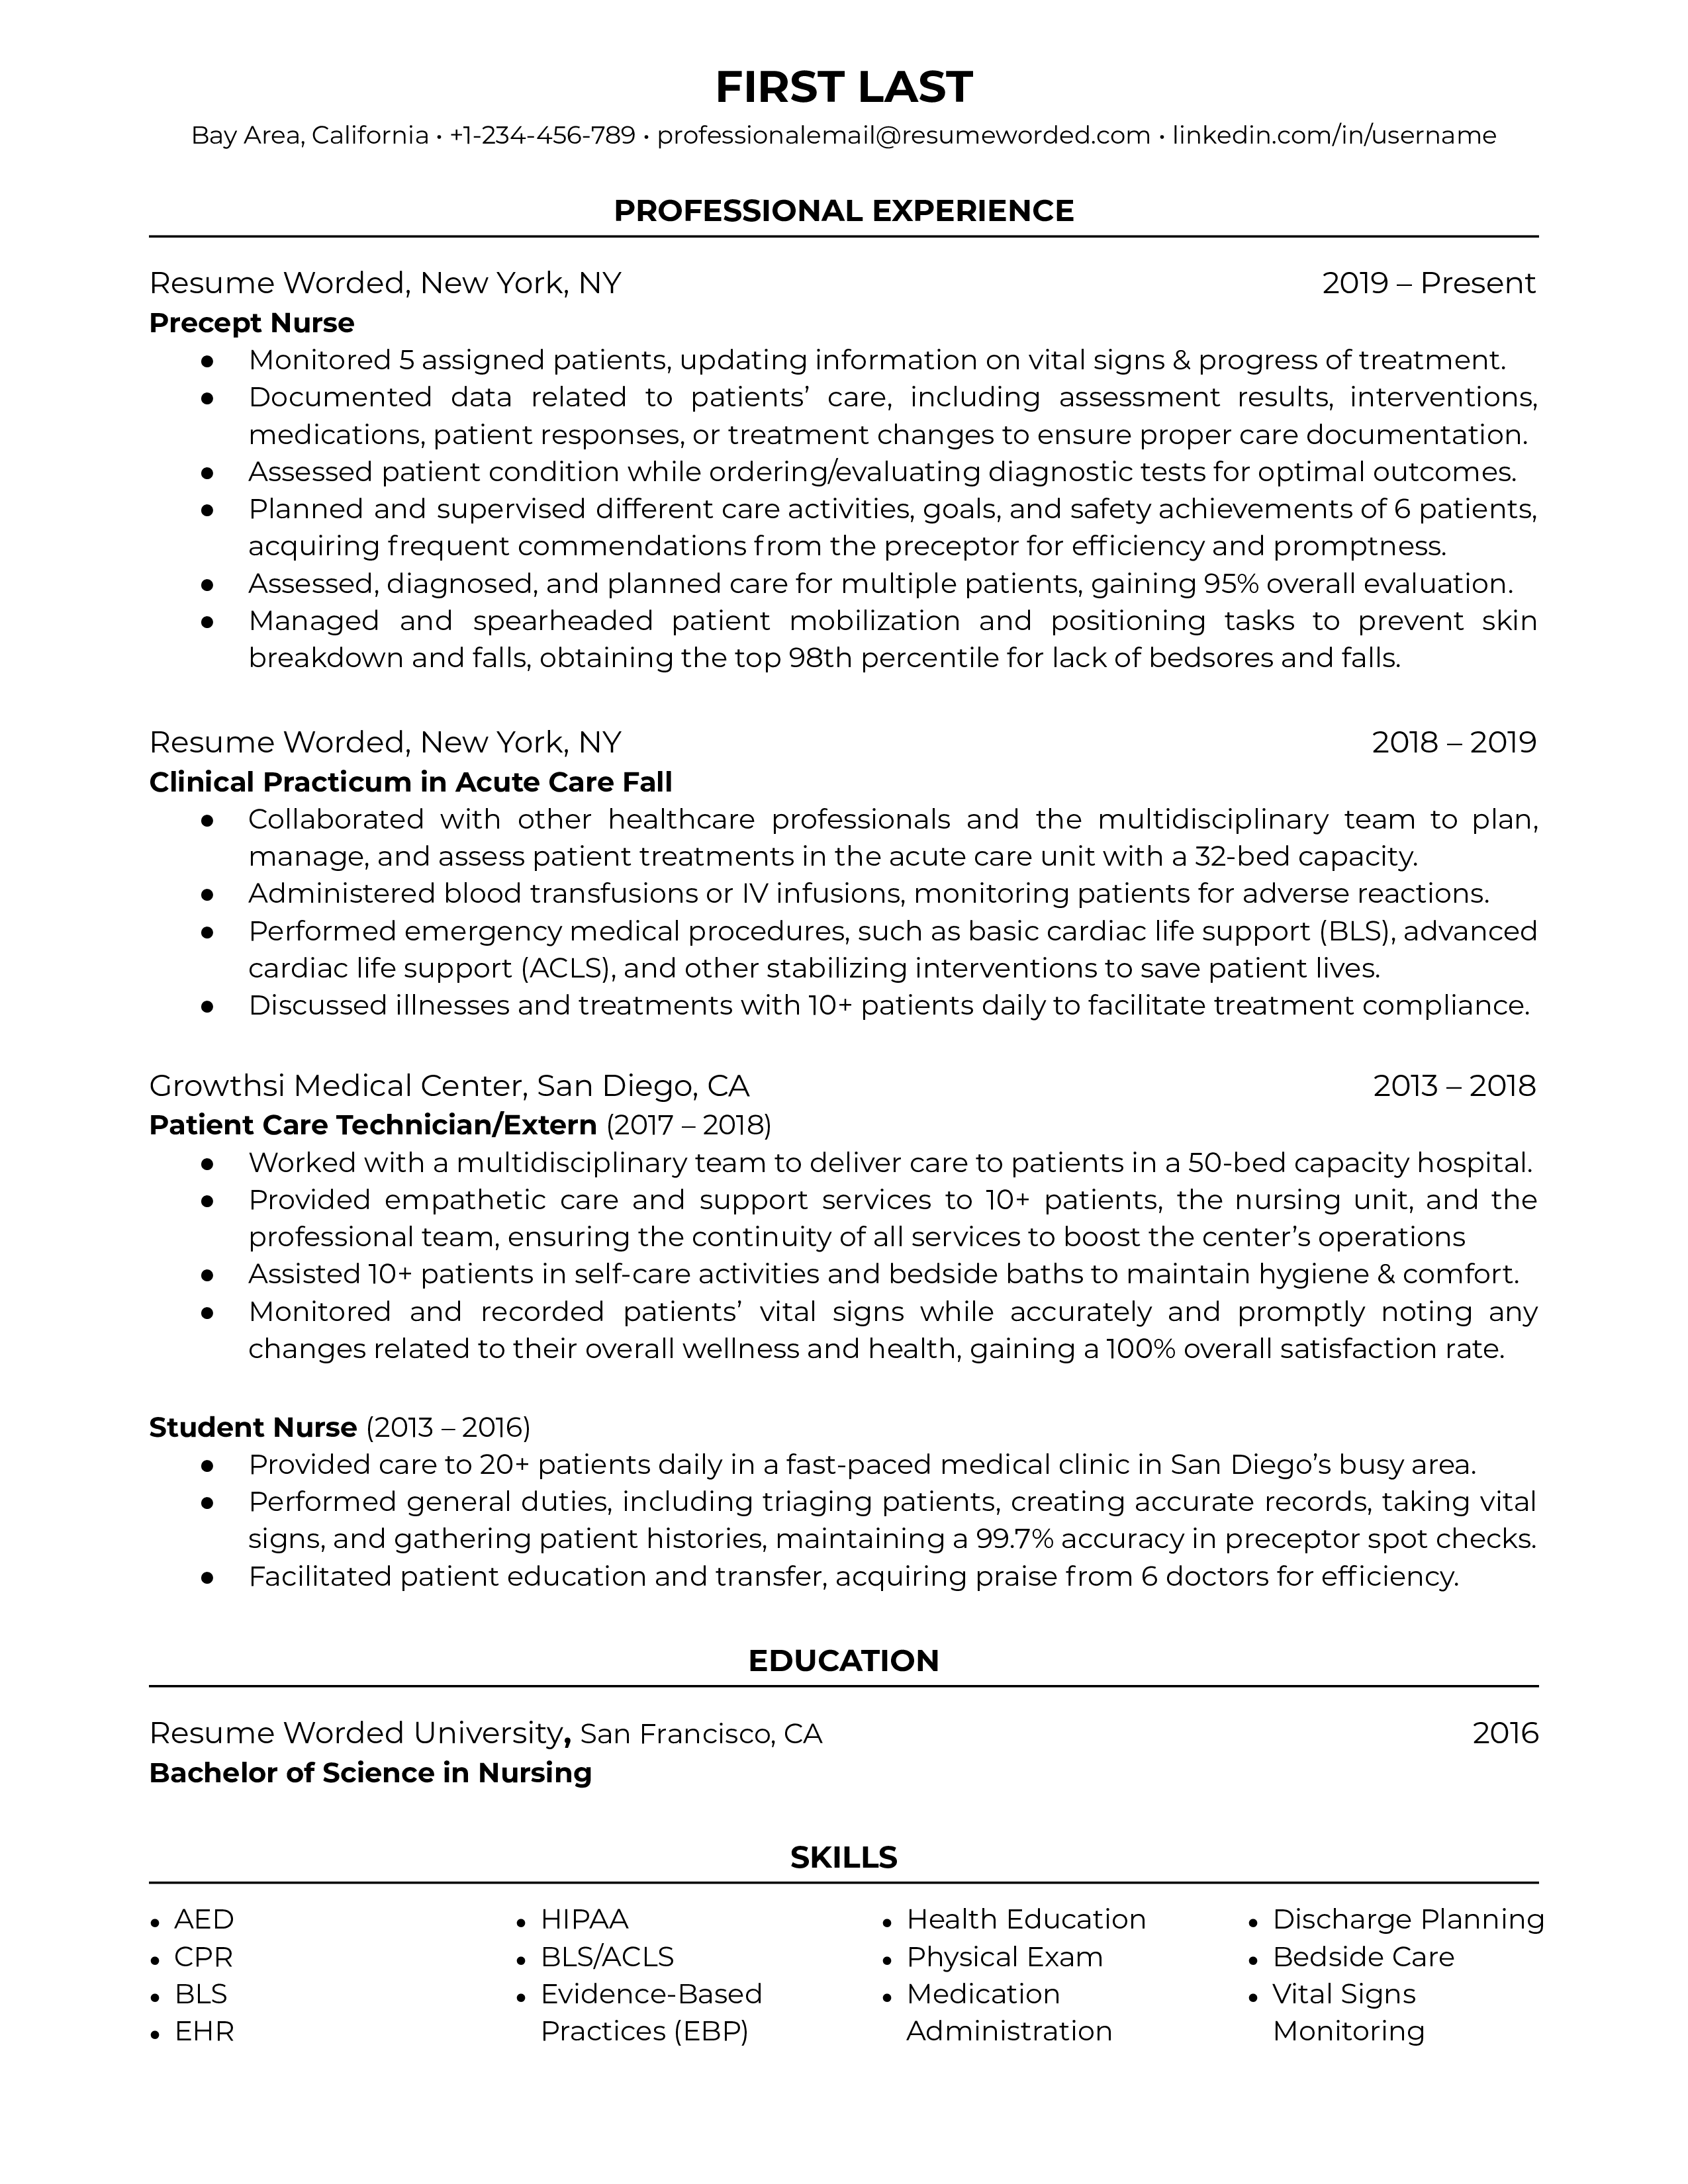 New grad nurse resume template sample listing specific skills gained through student nursing and practicum experience